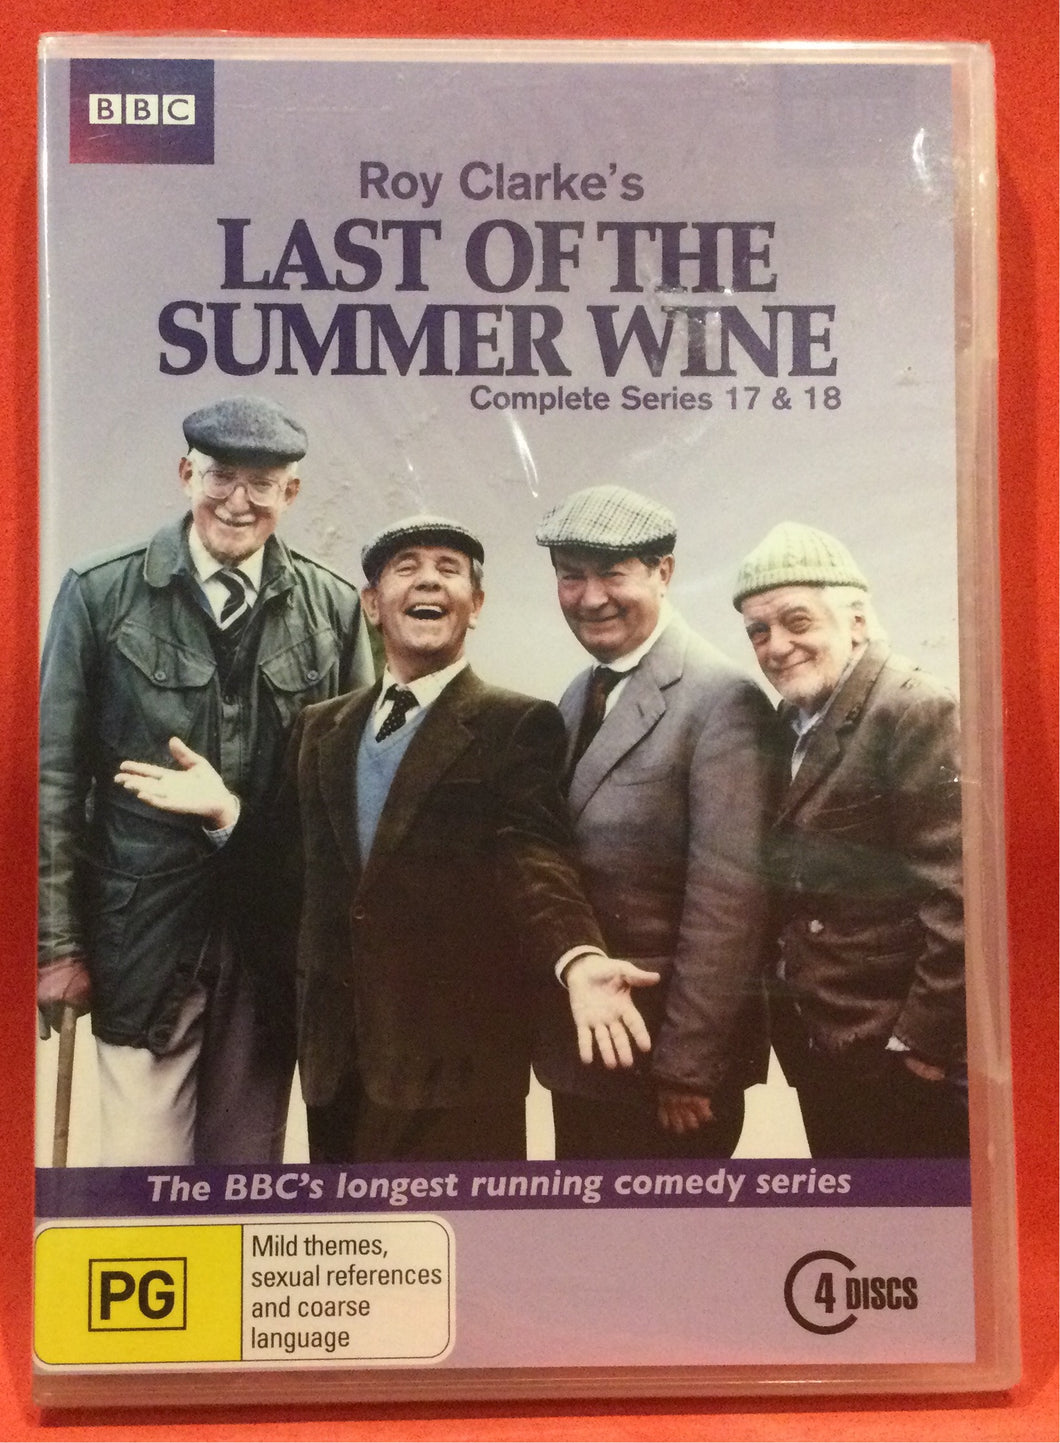 LAST OF THE SUMMER WINE - COMPLETE SERIES 17 & 18 - 4 DVD DISCS (SEALED)